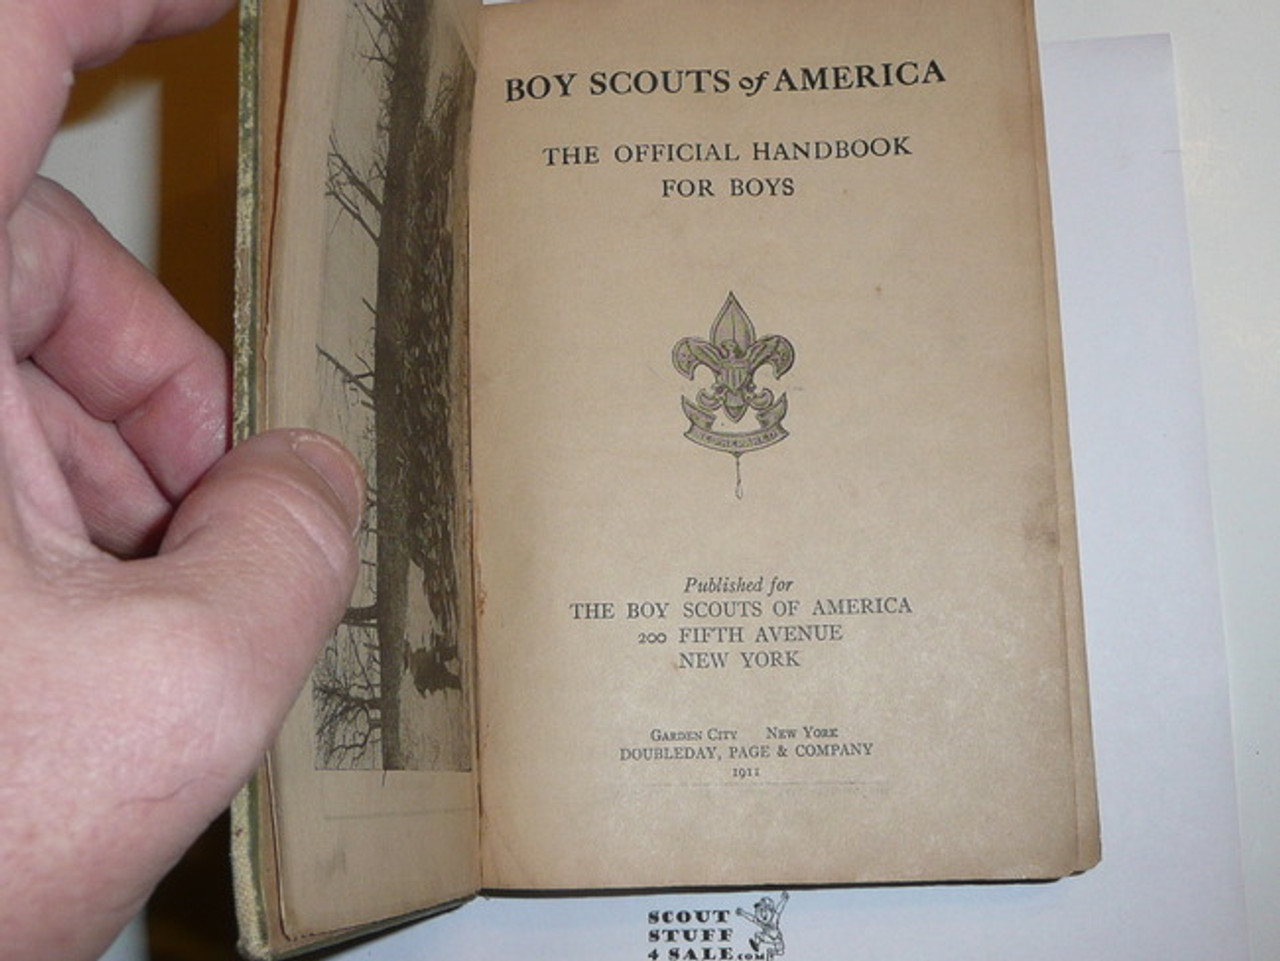 1911 Boy Scout Handbook, First Edition, Second Printing, Hardbound, 404 numbered Pages, Some wear but solid and complete